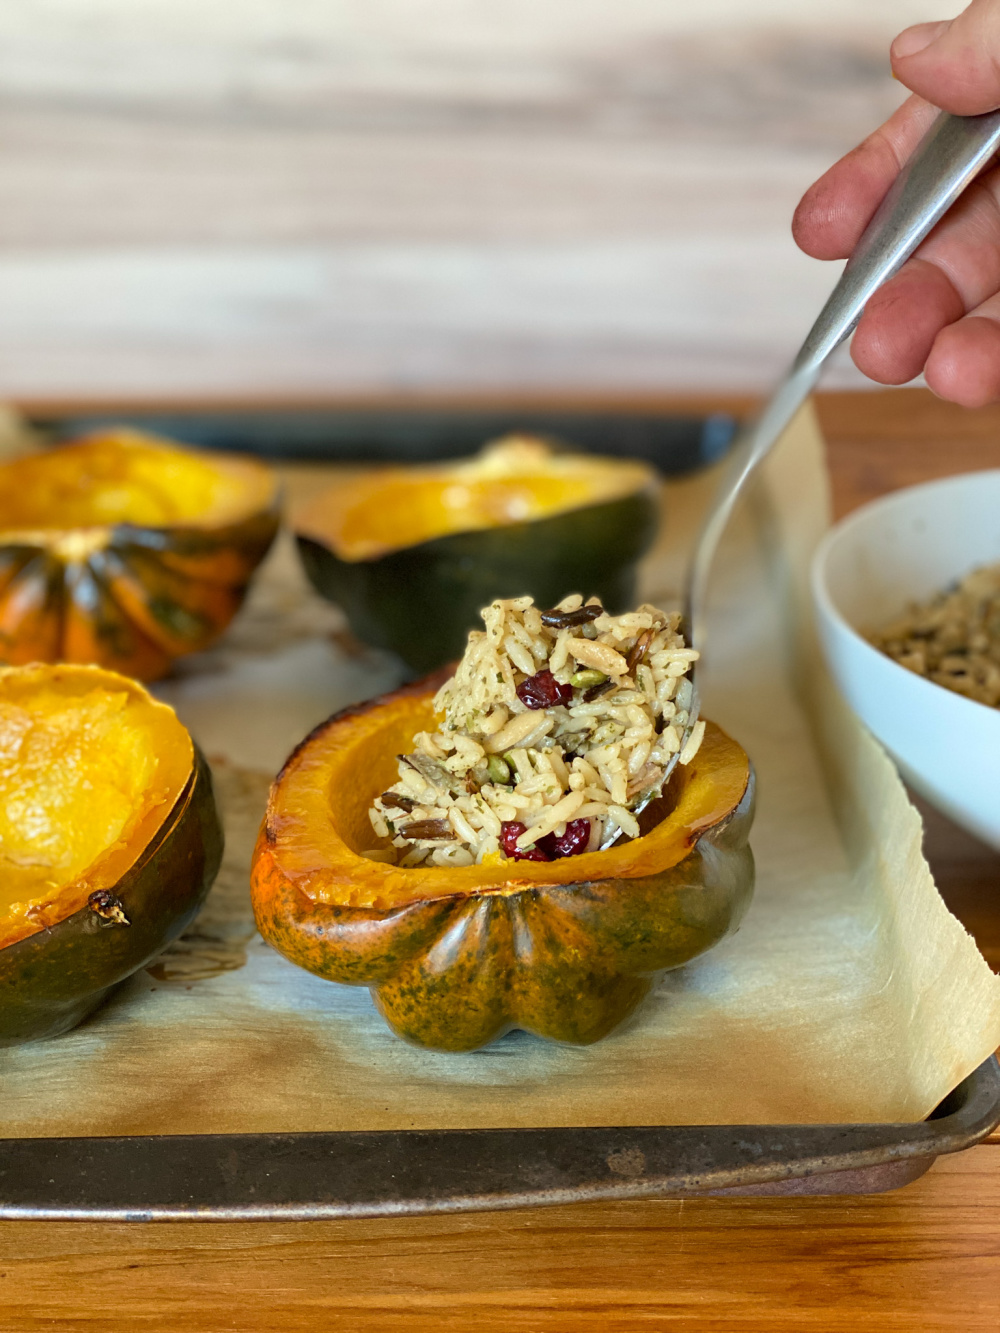 Stuffing the squash with rice